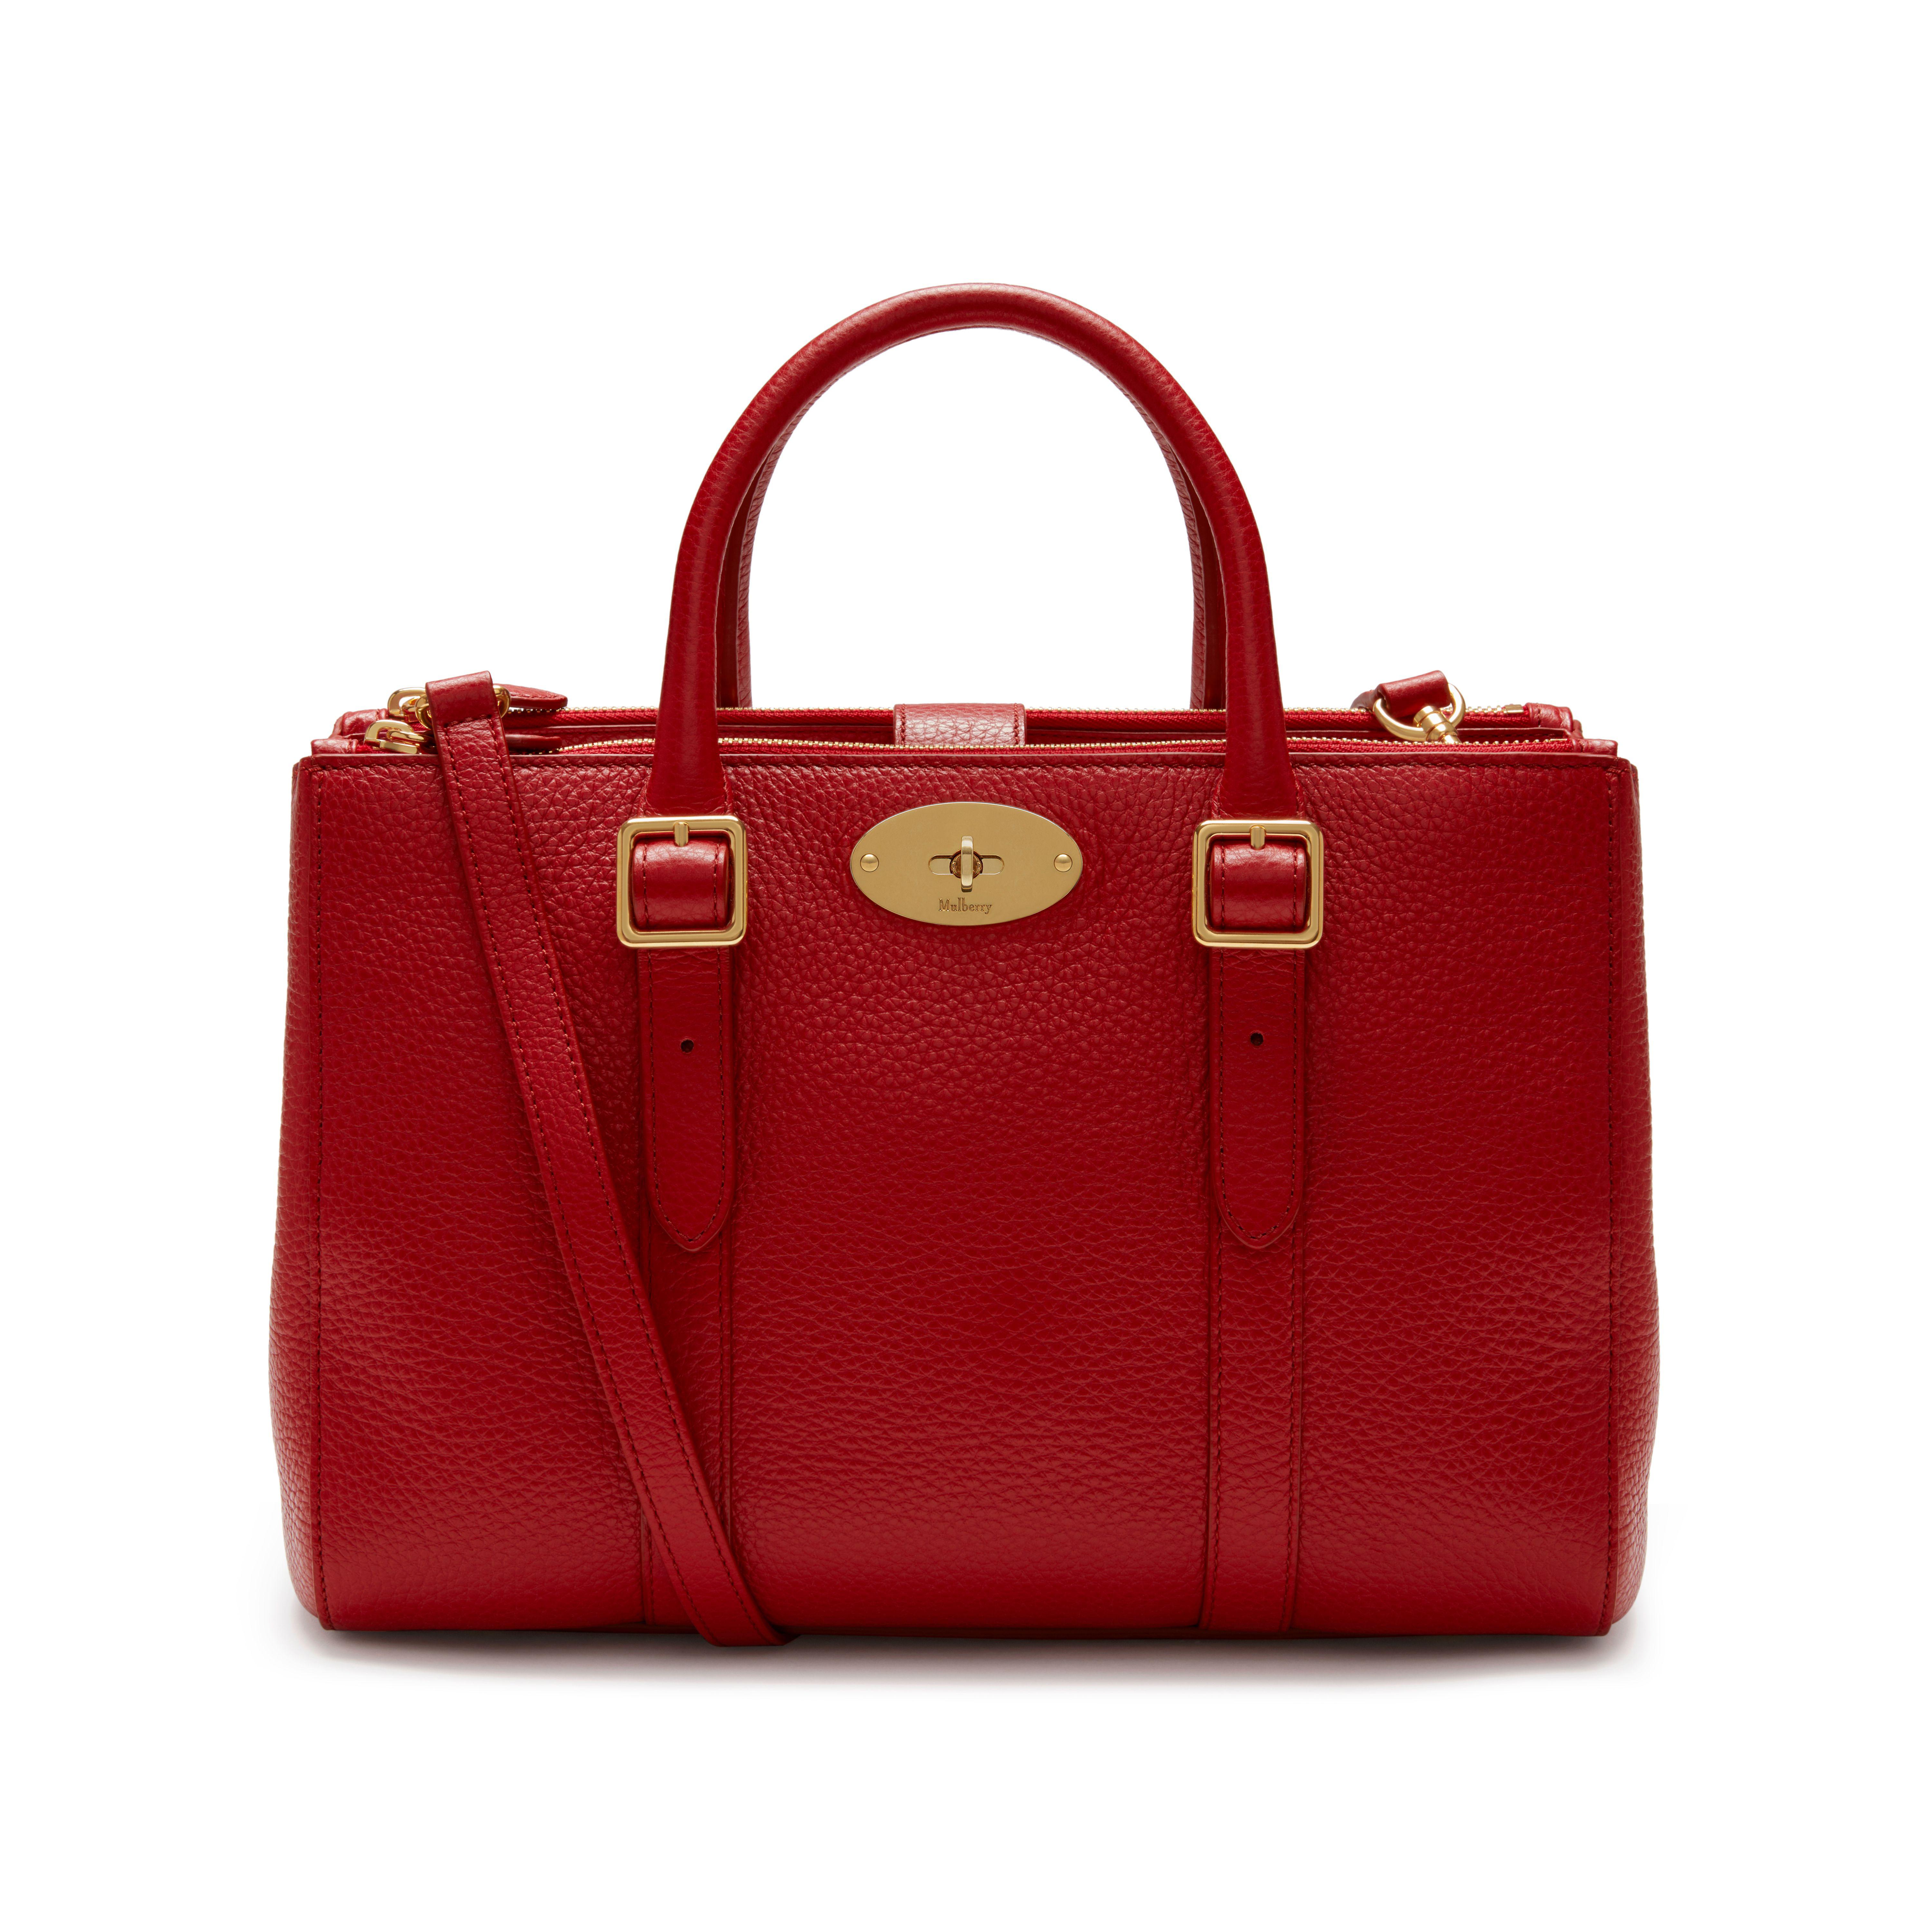 Mulberry Leather Small Bayswater Double Zip Tote in Scarlet (Red) - Lyst